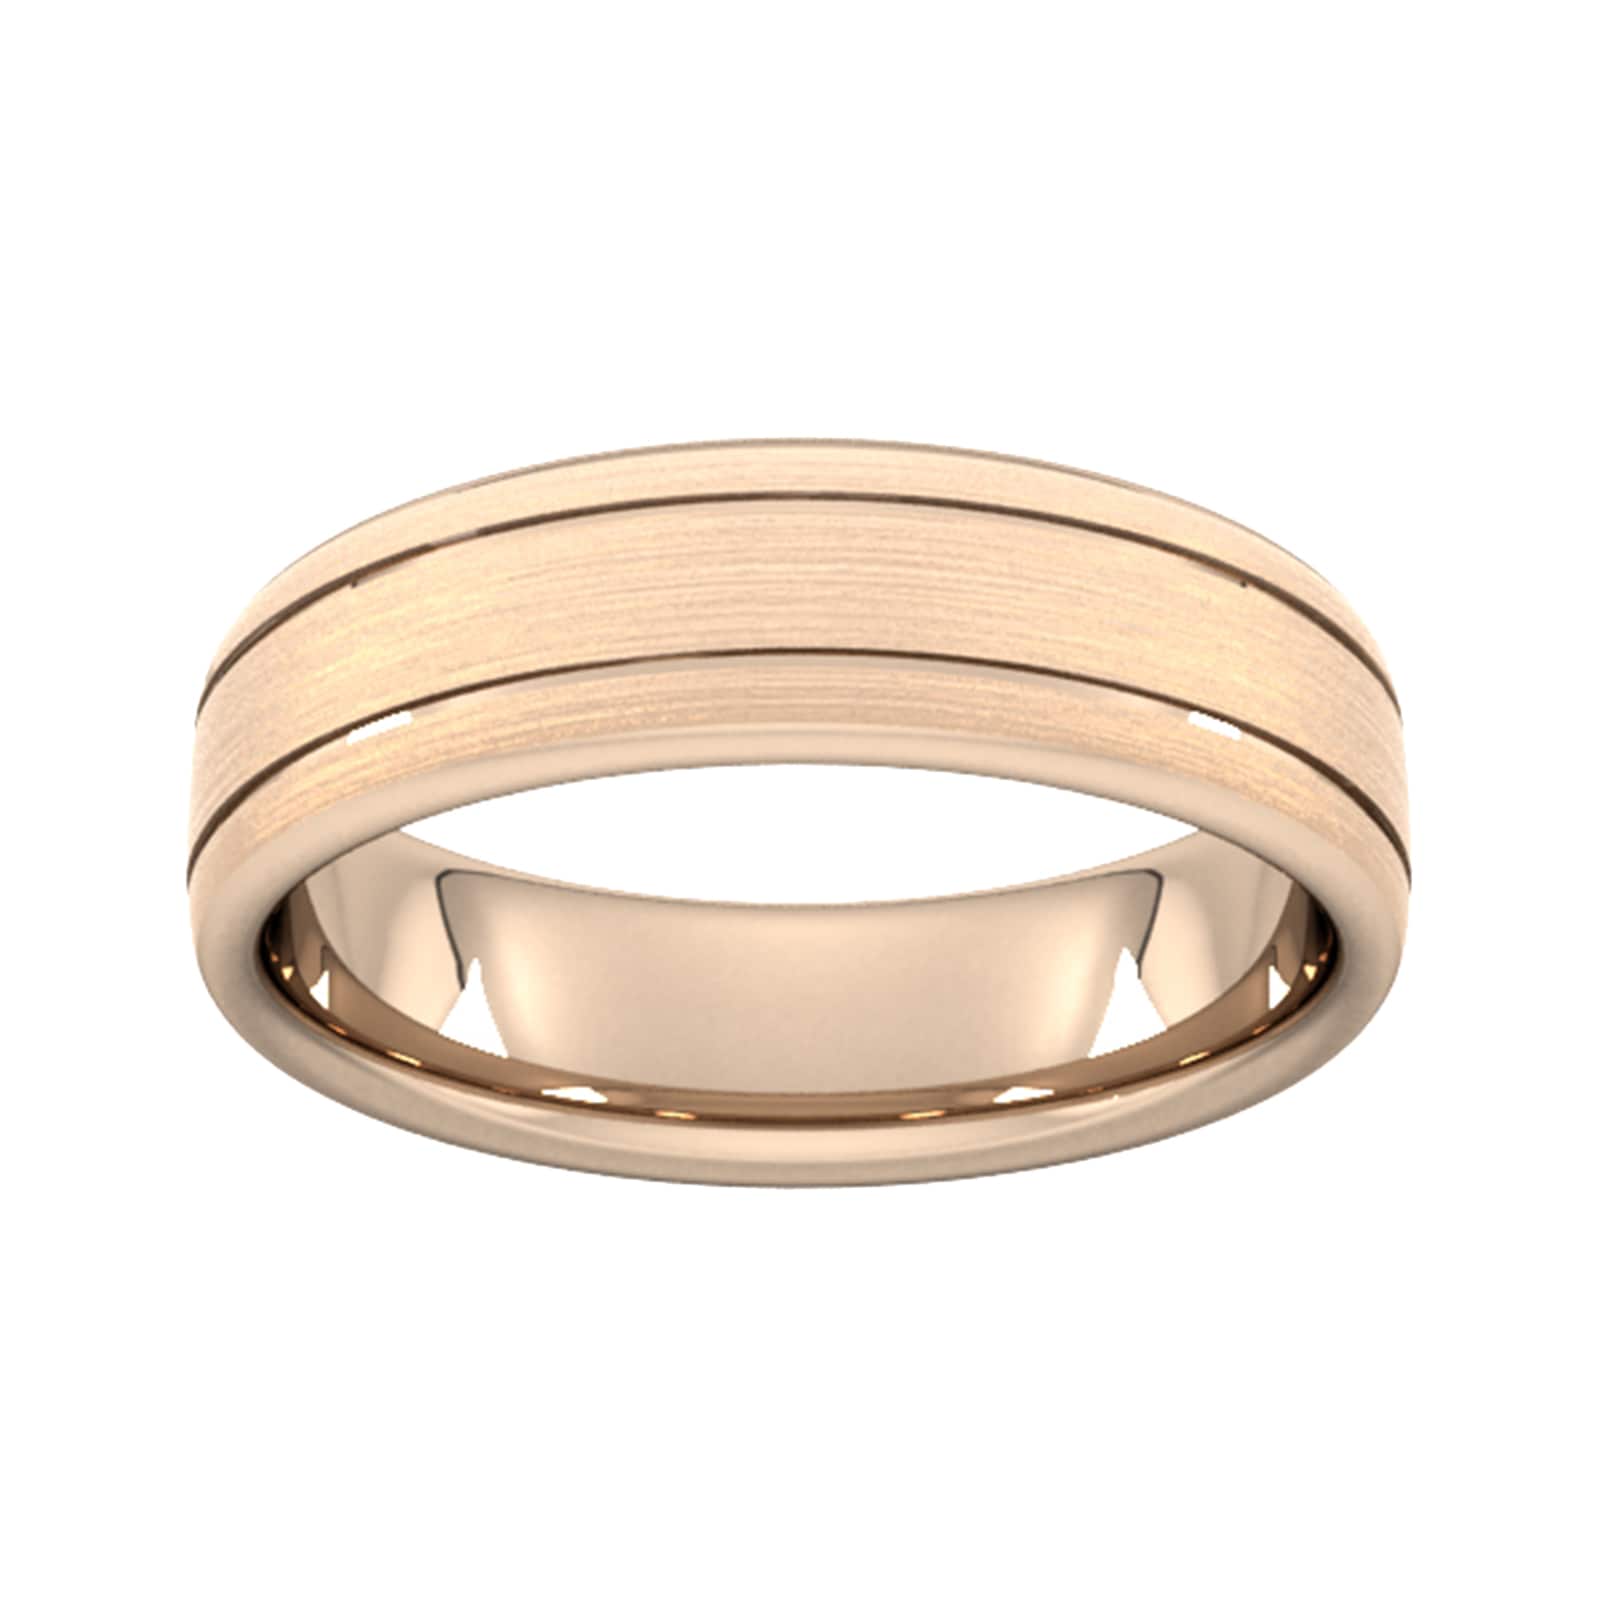 6mm Flat Court Heavy Matt Finish With Double Grooves Wedding Ring In 18 Carat Rose Gold - Ring Size W